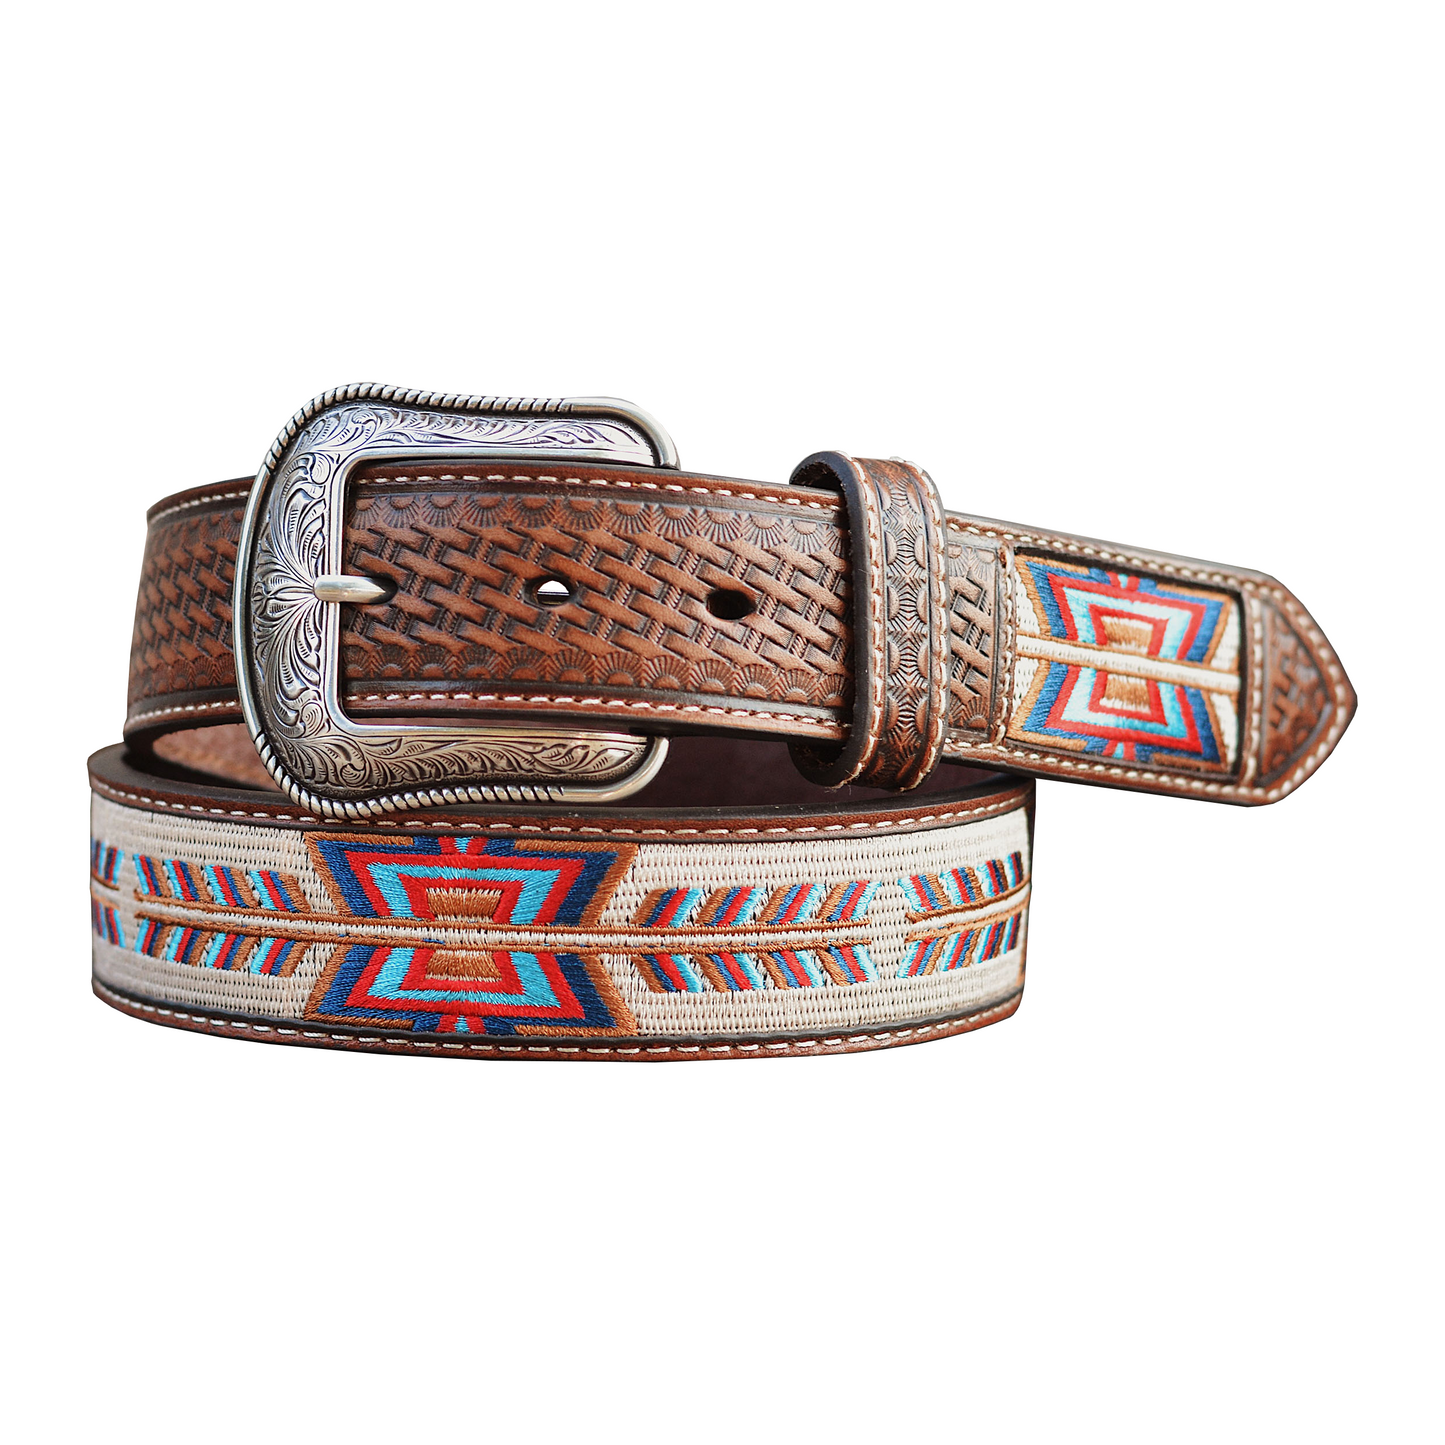 Men's Basketweave Leather Belt with Embroidered Arrows